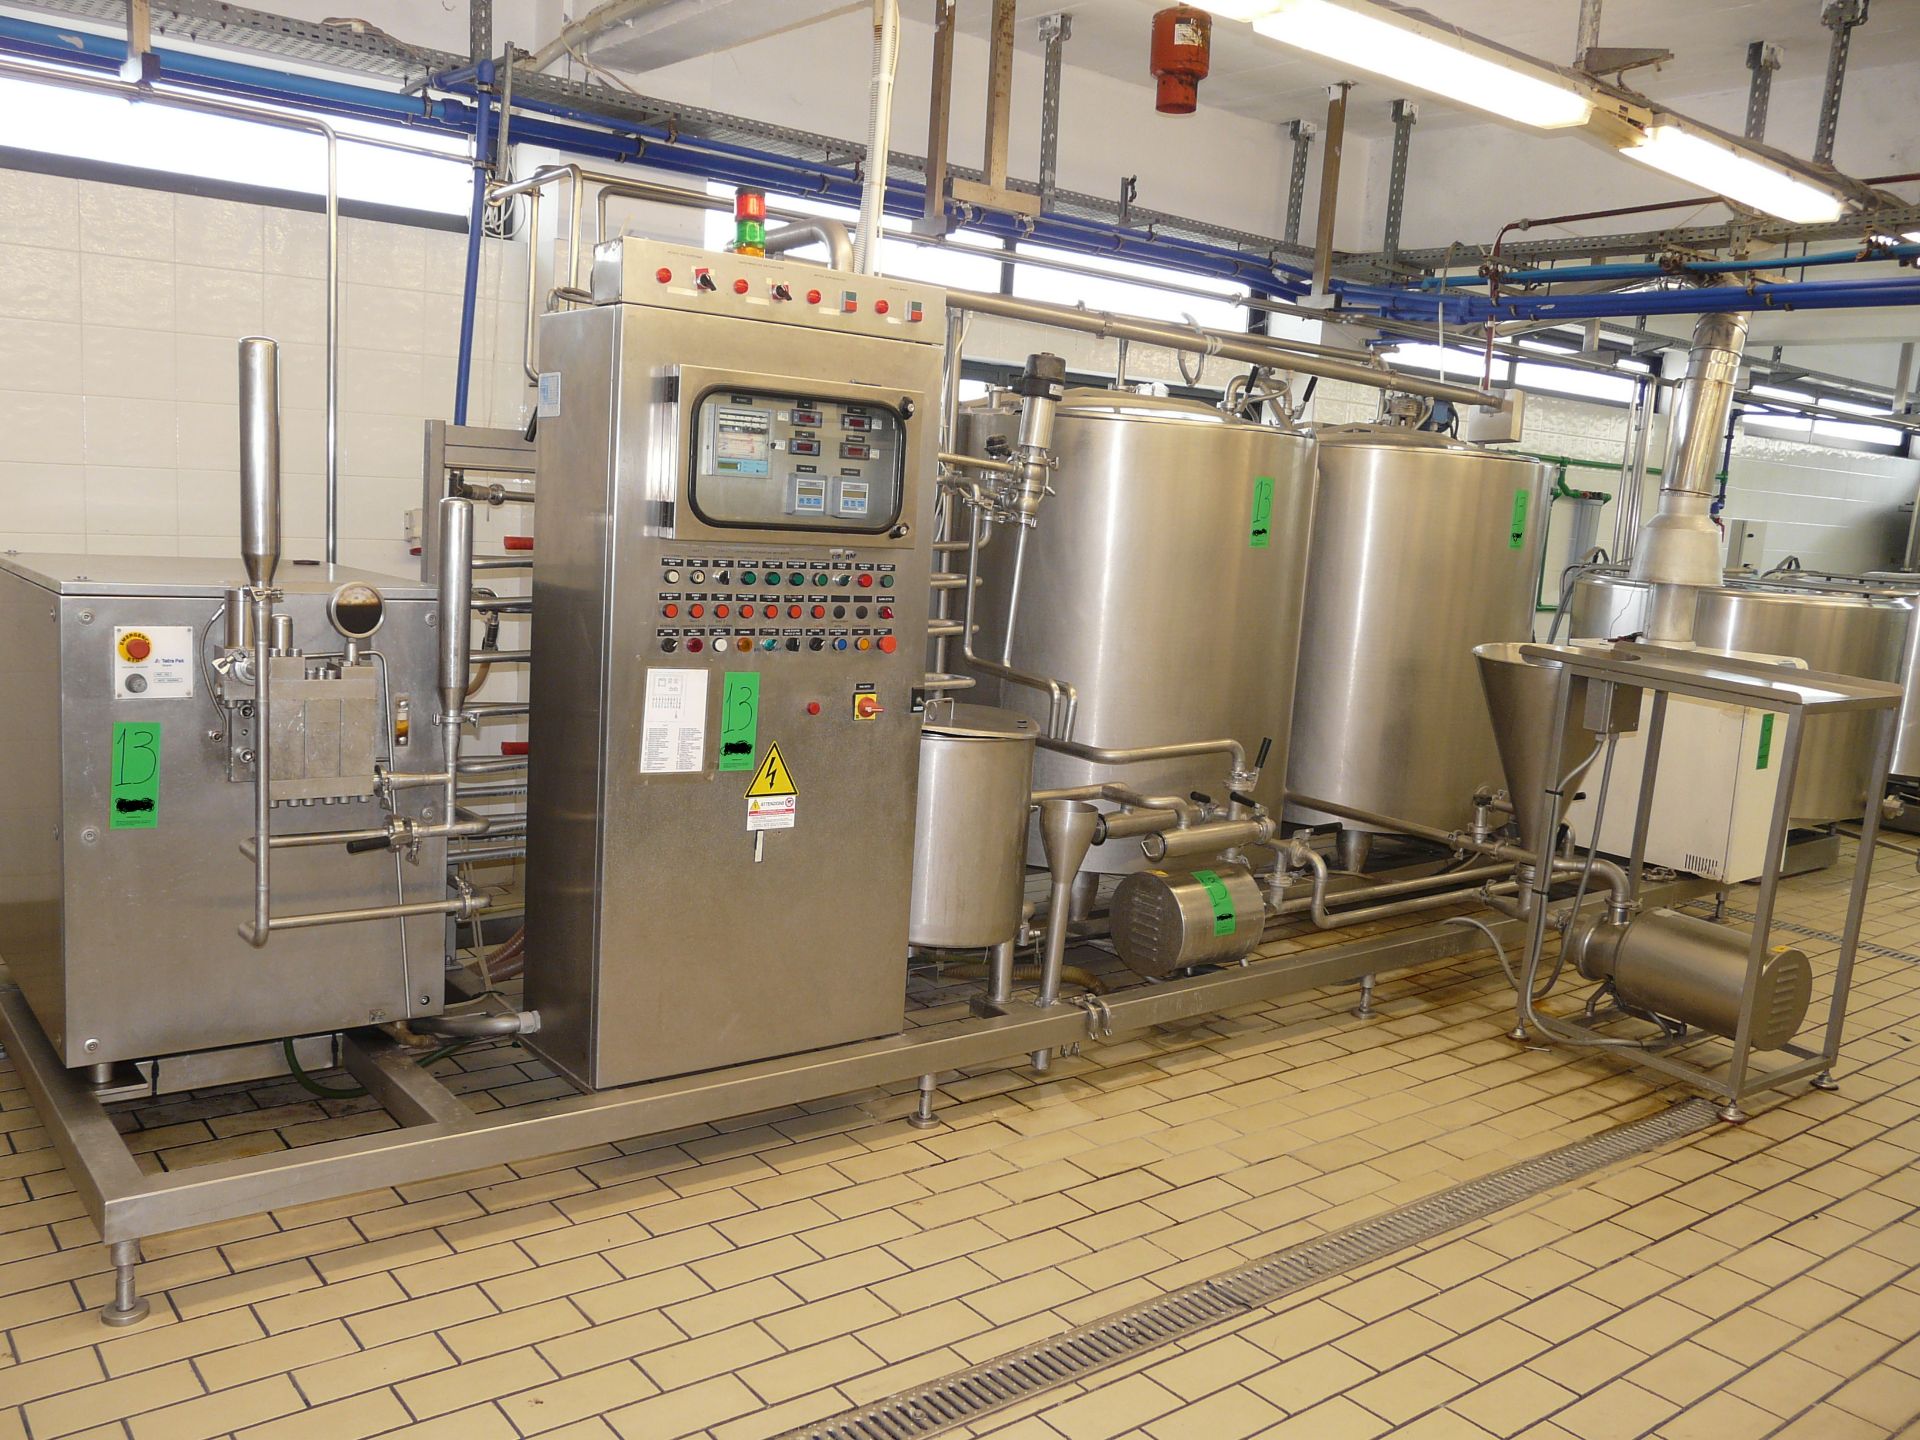 TETRA PAK HOYER HTST 1200 Pasteurizer for Ice Cream , Contains 2 x Tanks with agitators ,1 Plate